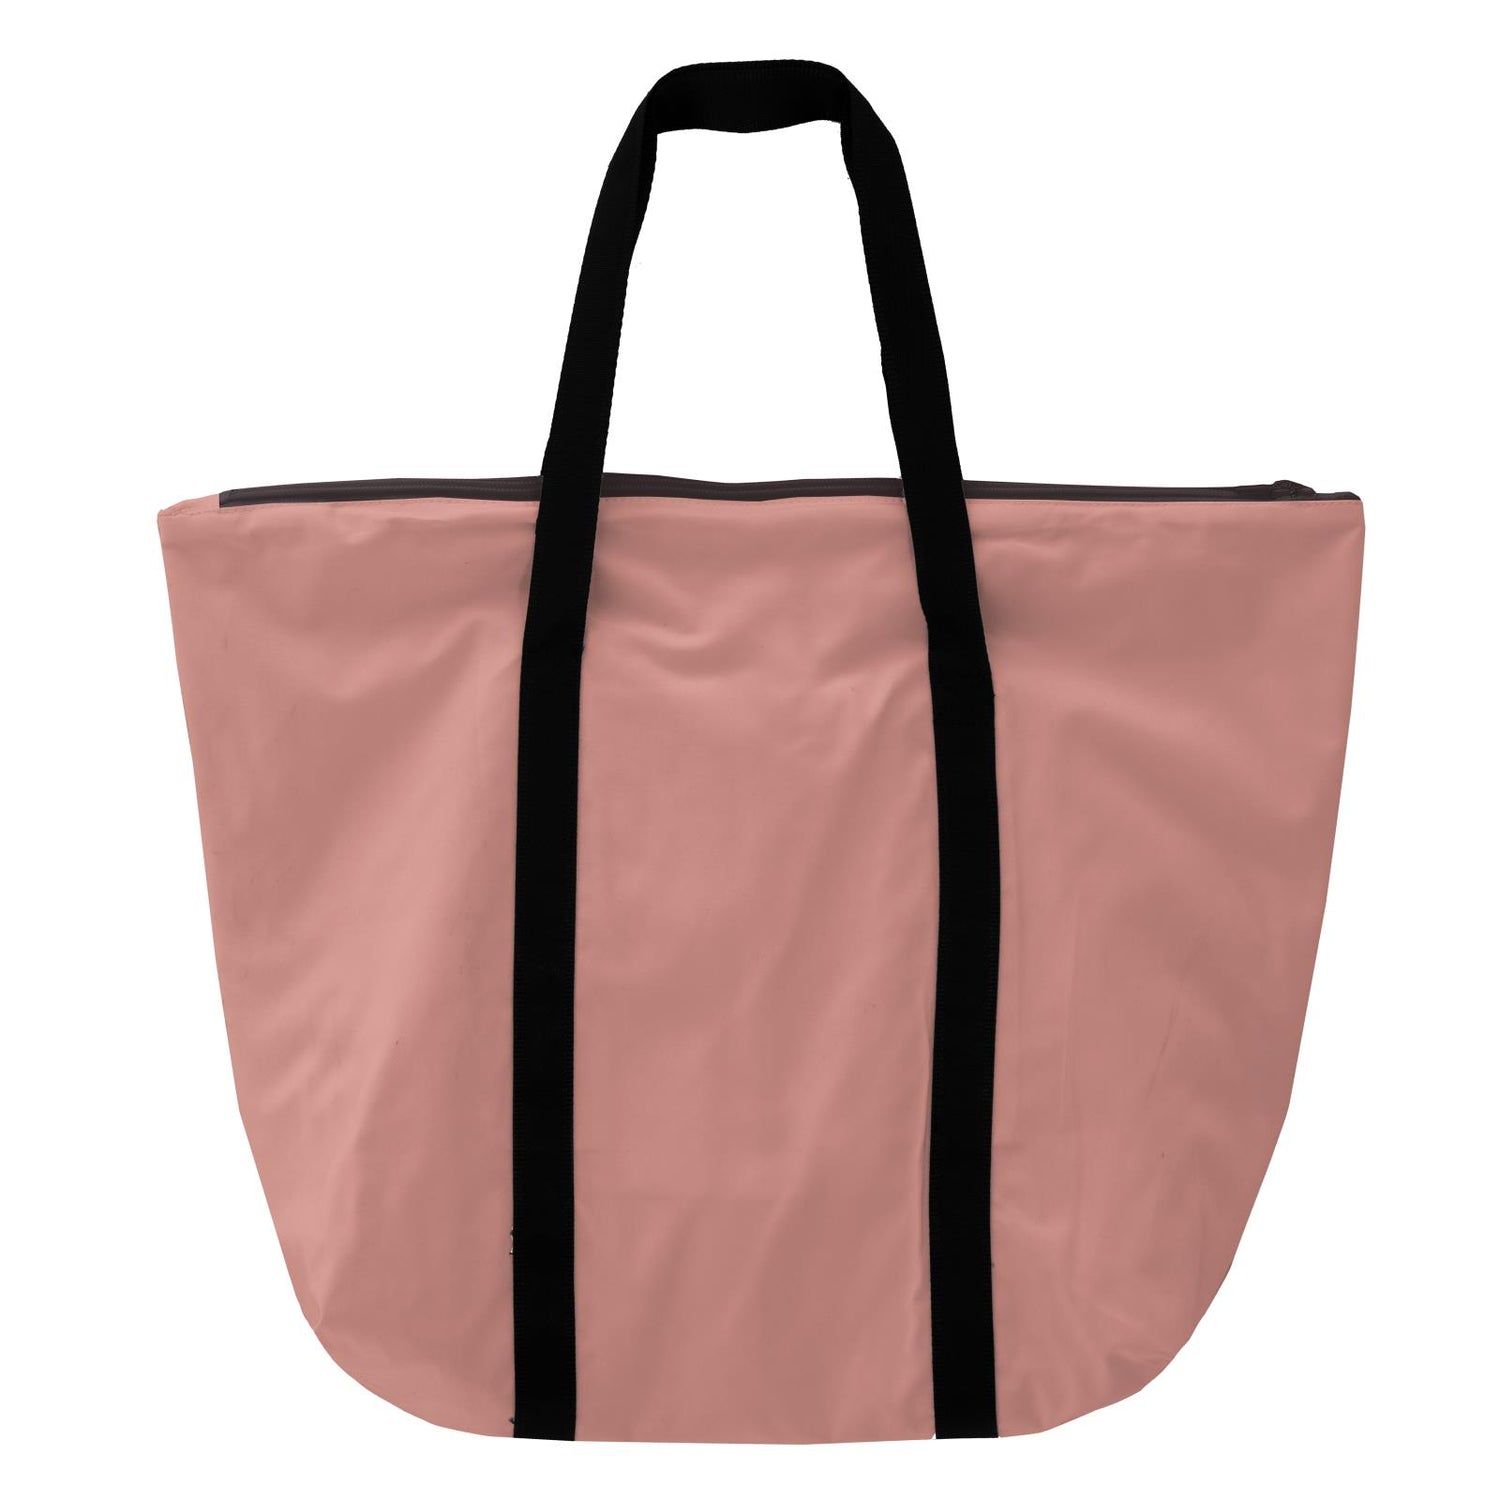 Coated Woven Tote Bag in Blush